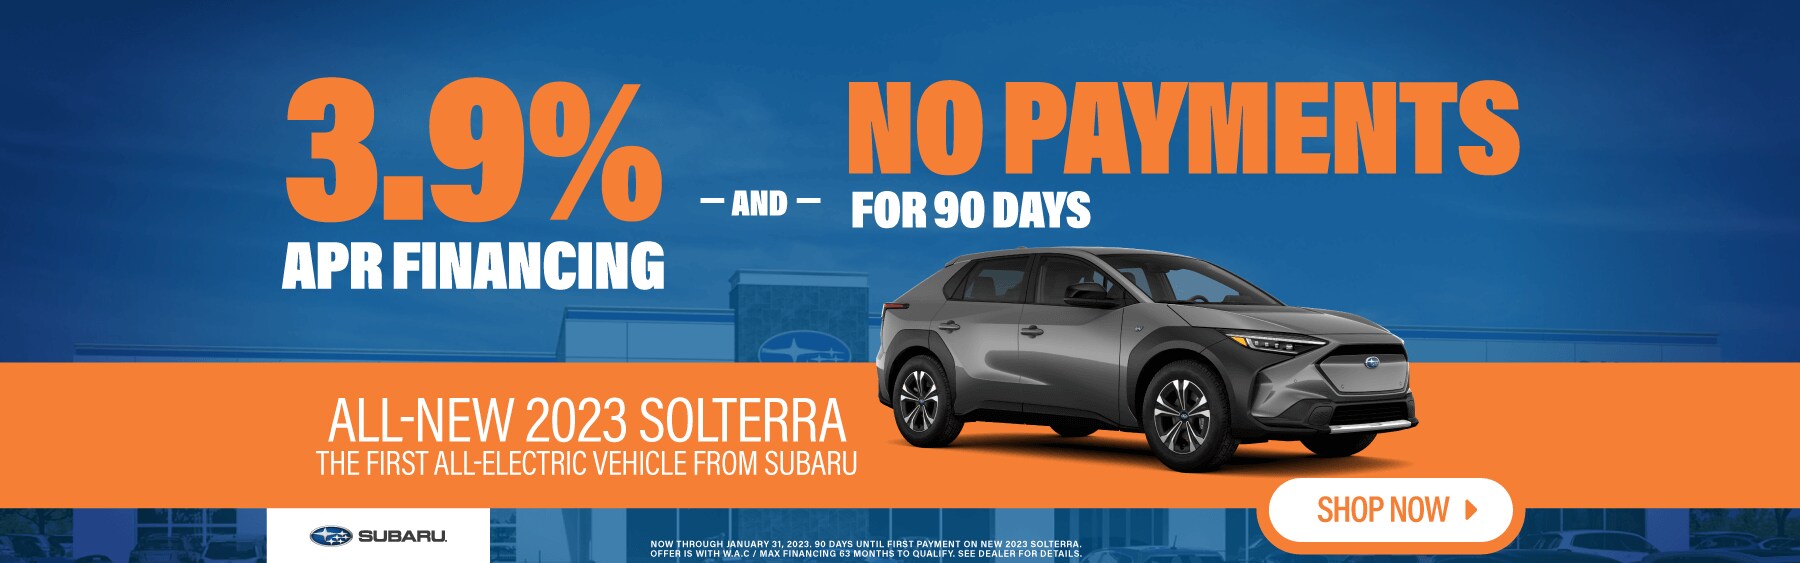 3.9% APR and No Payments For 90 Days on 2023 Solterra